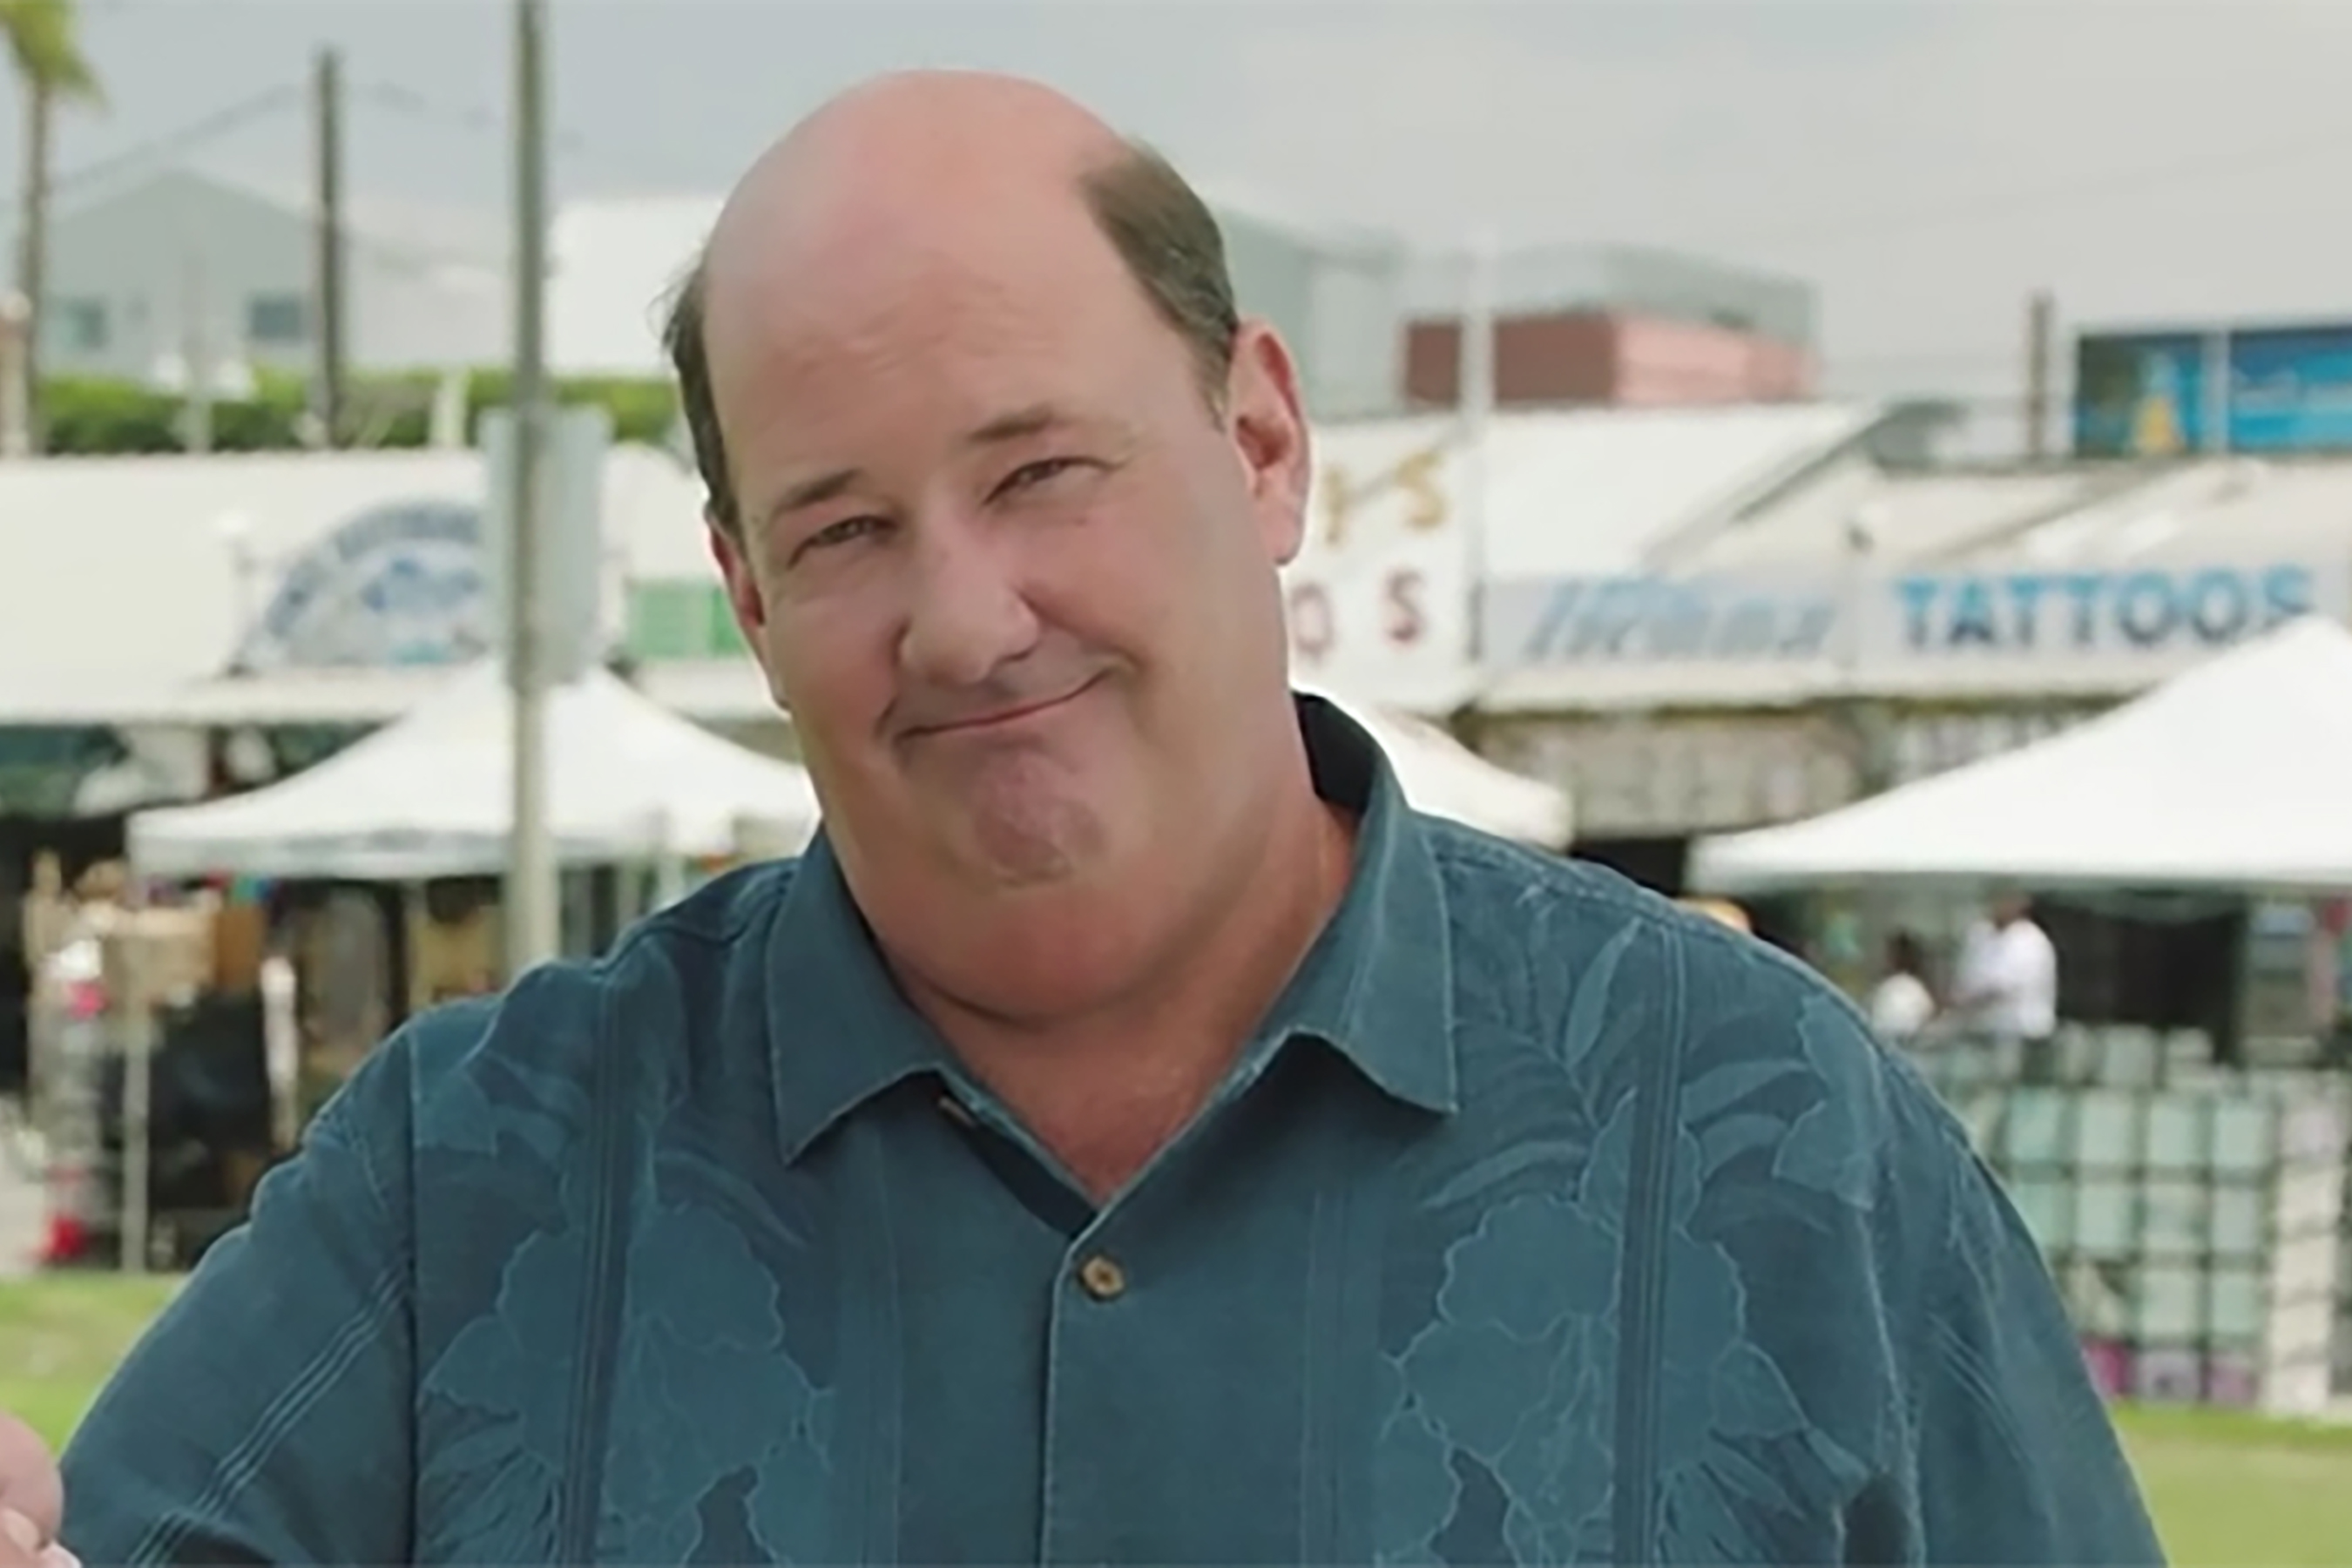 Brian Baumgartner on the set with 'got milk?' for "Never Doubt What You Love" campaign